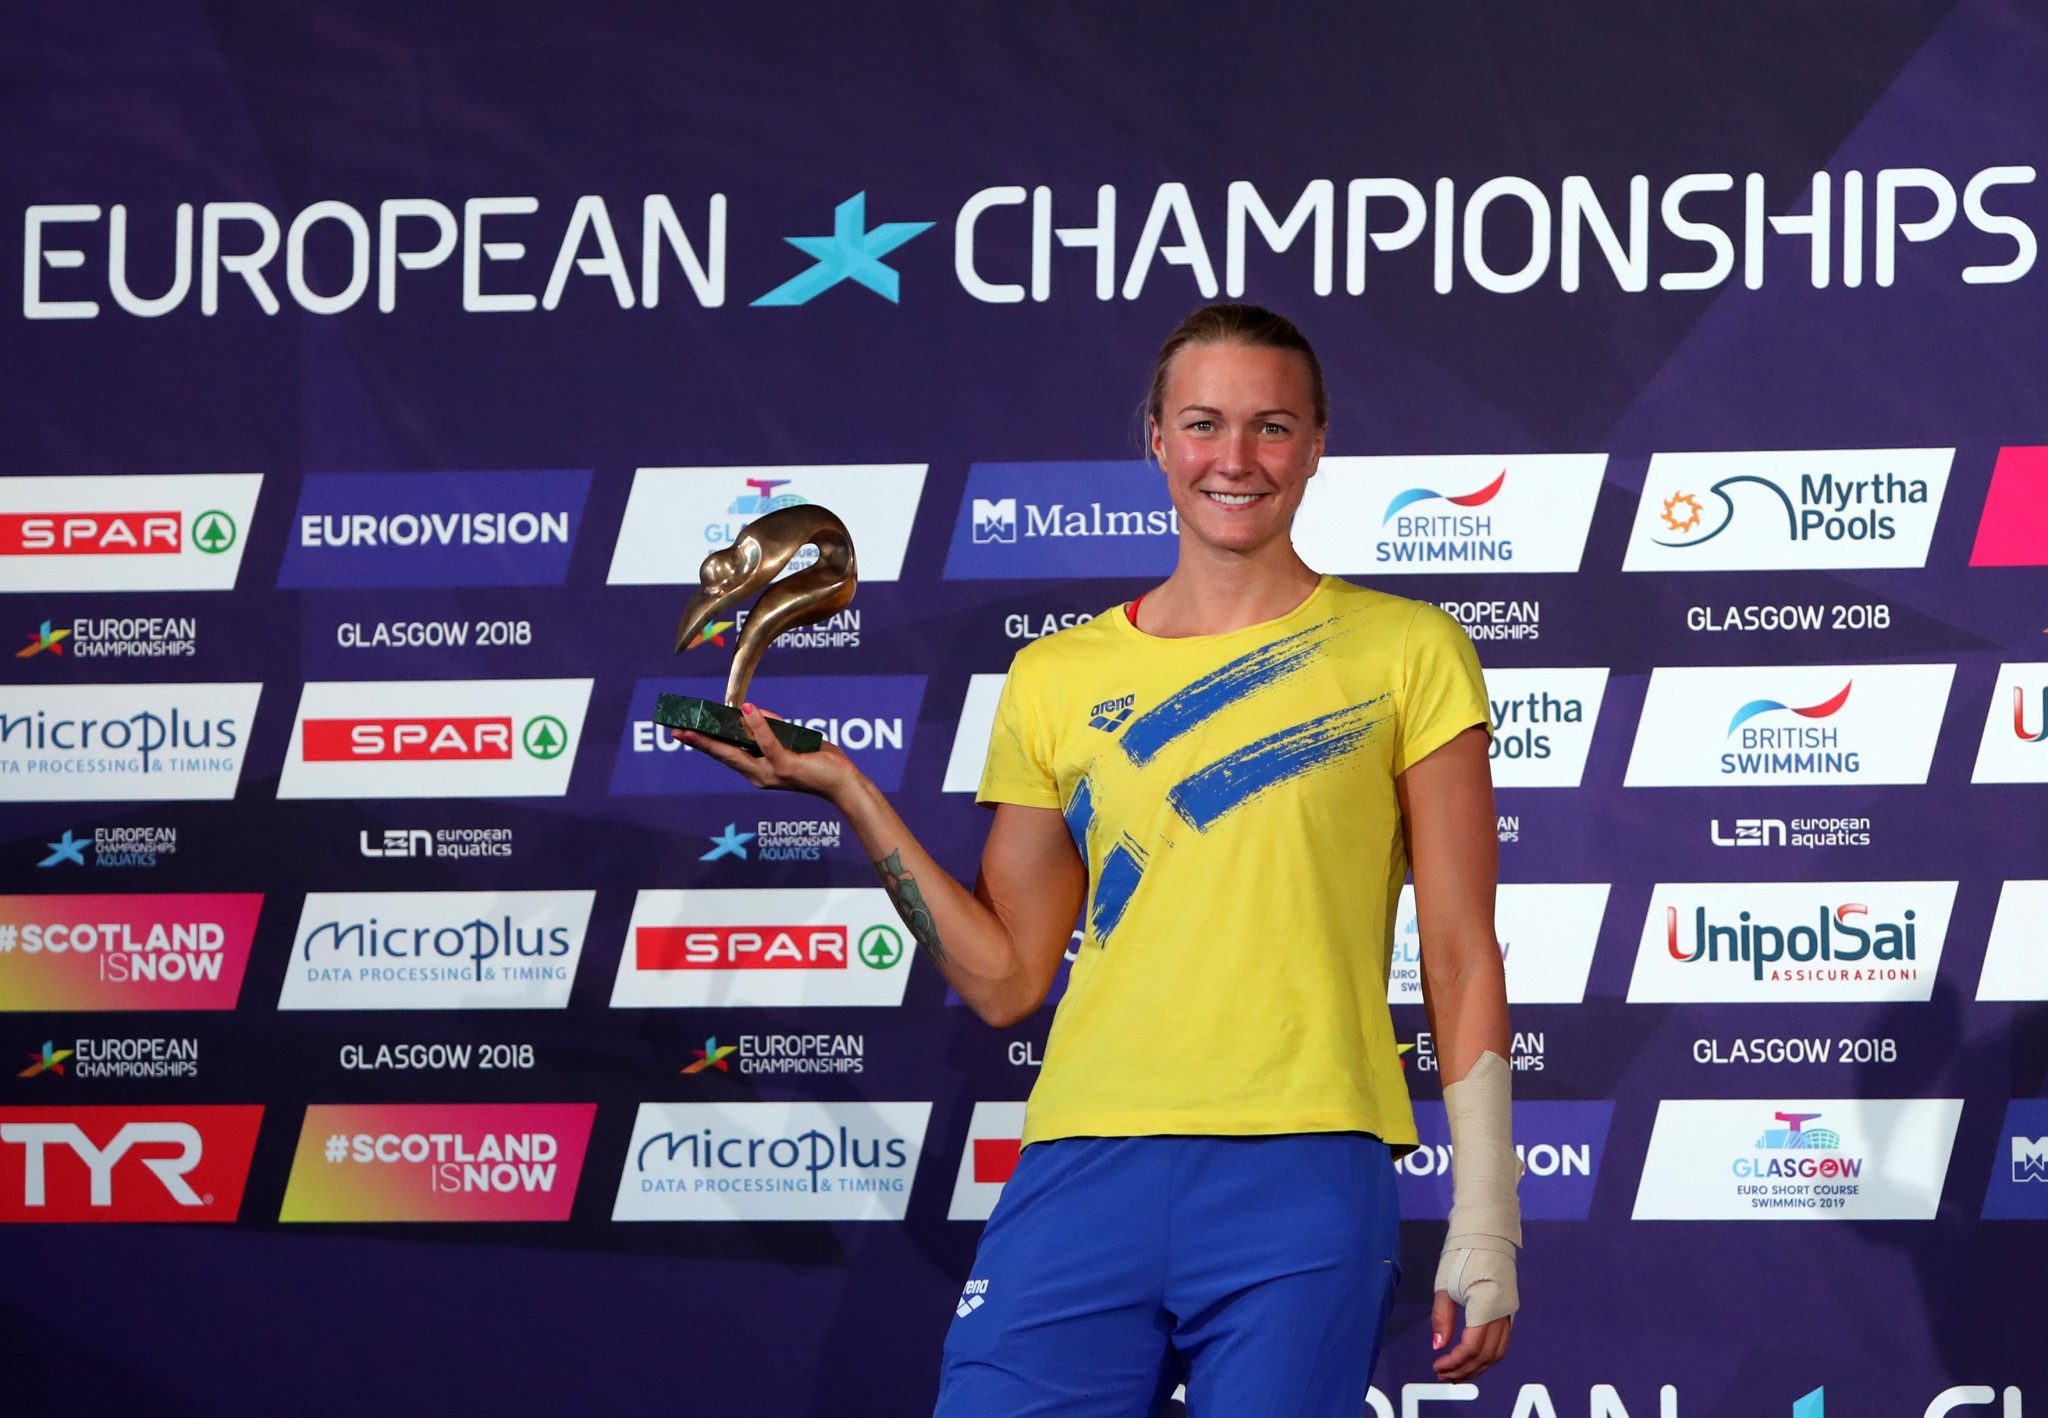 Sweden's Sarah Sjöström gained the women's swimming LEN award after winning four gold medals at the 2018 European Championships in Glasgow ©Getty Images